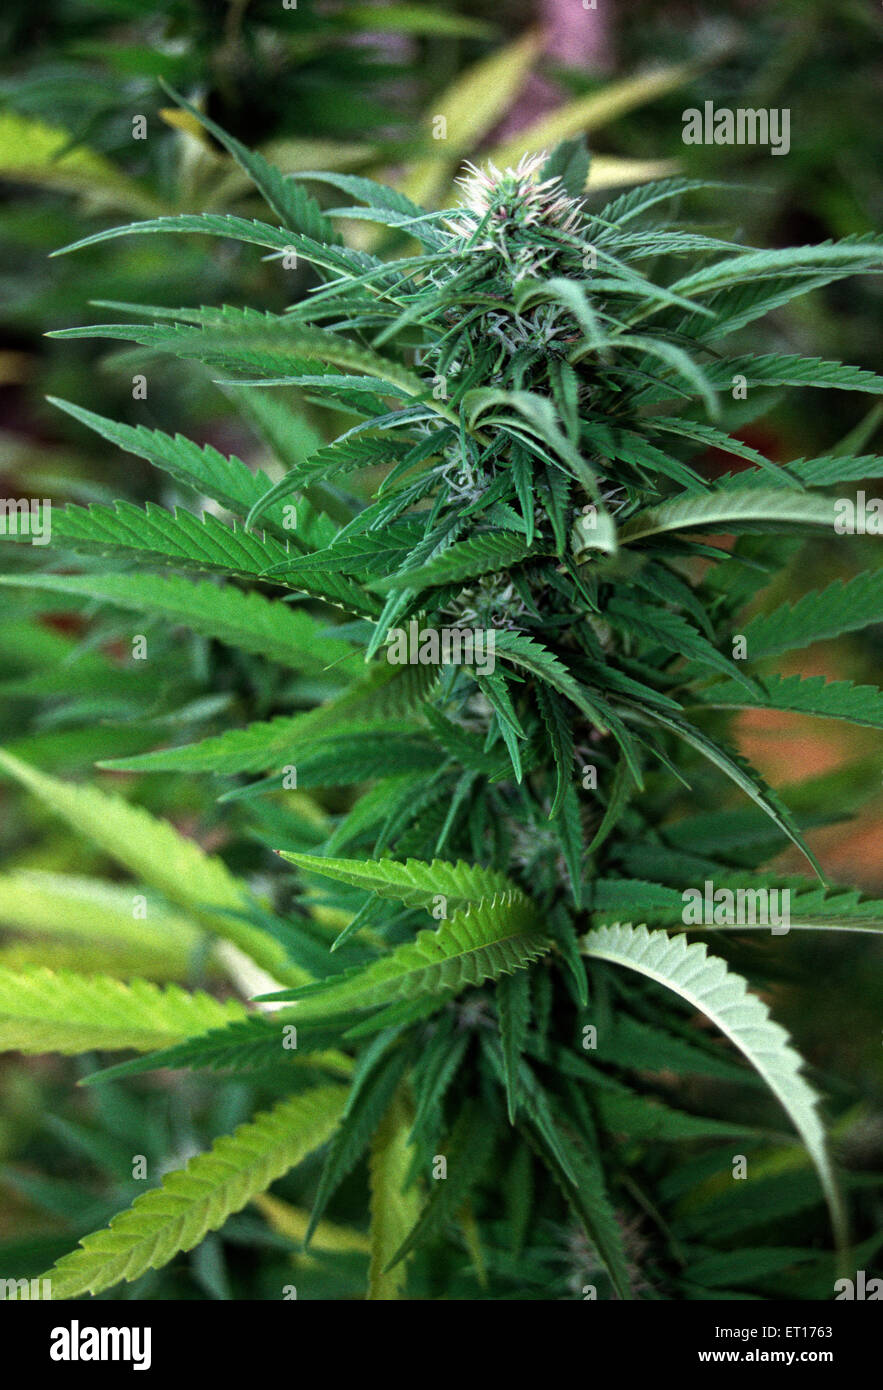 Leaves of a cannabis plant Stock Photo